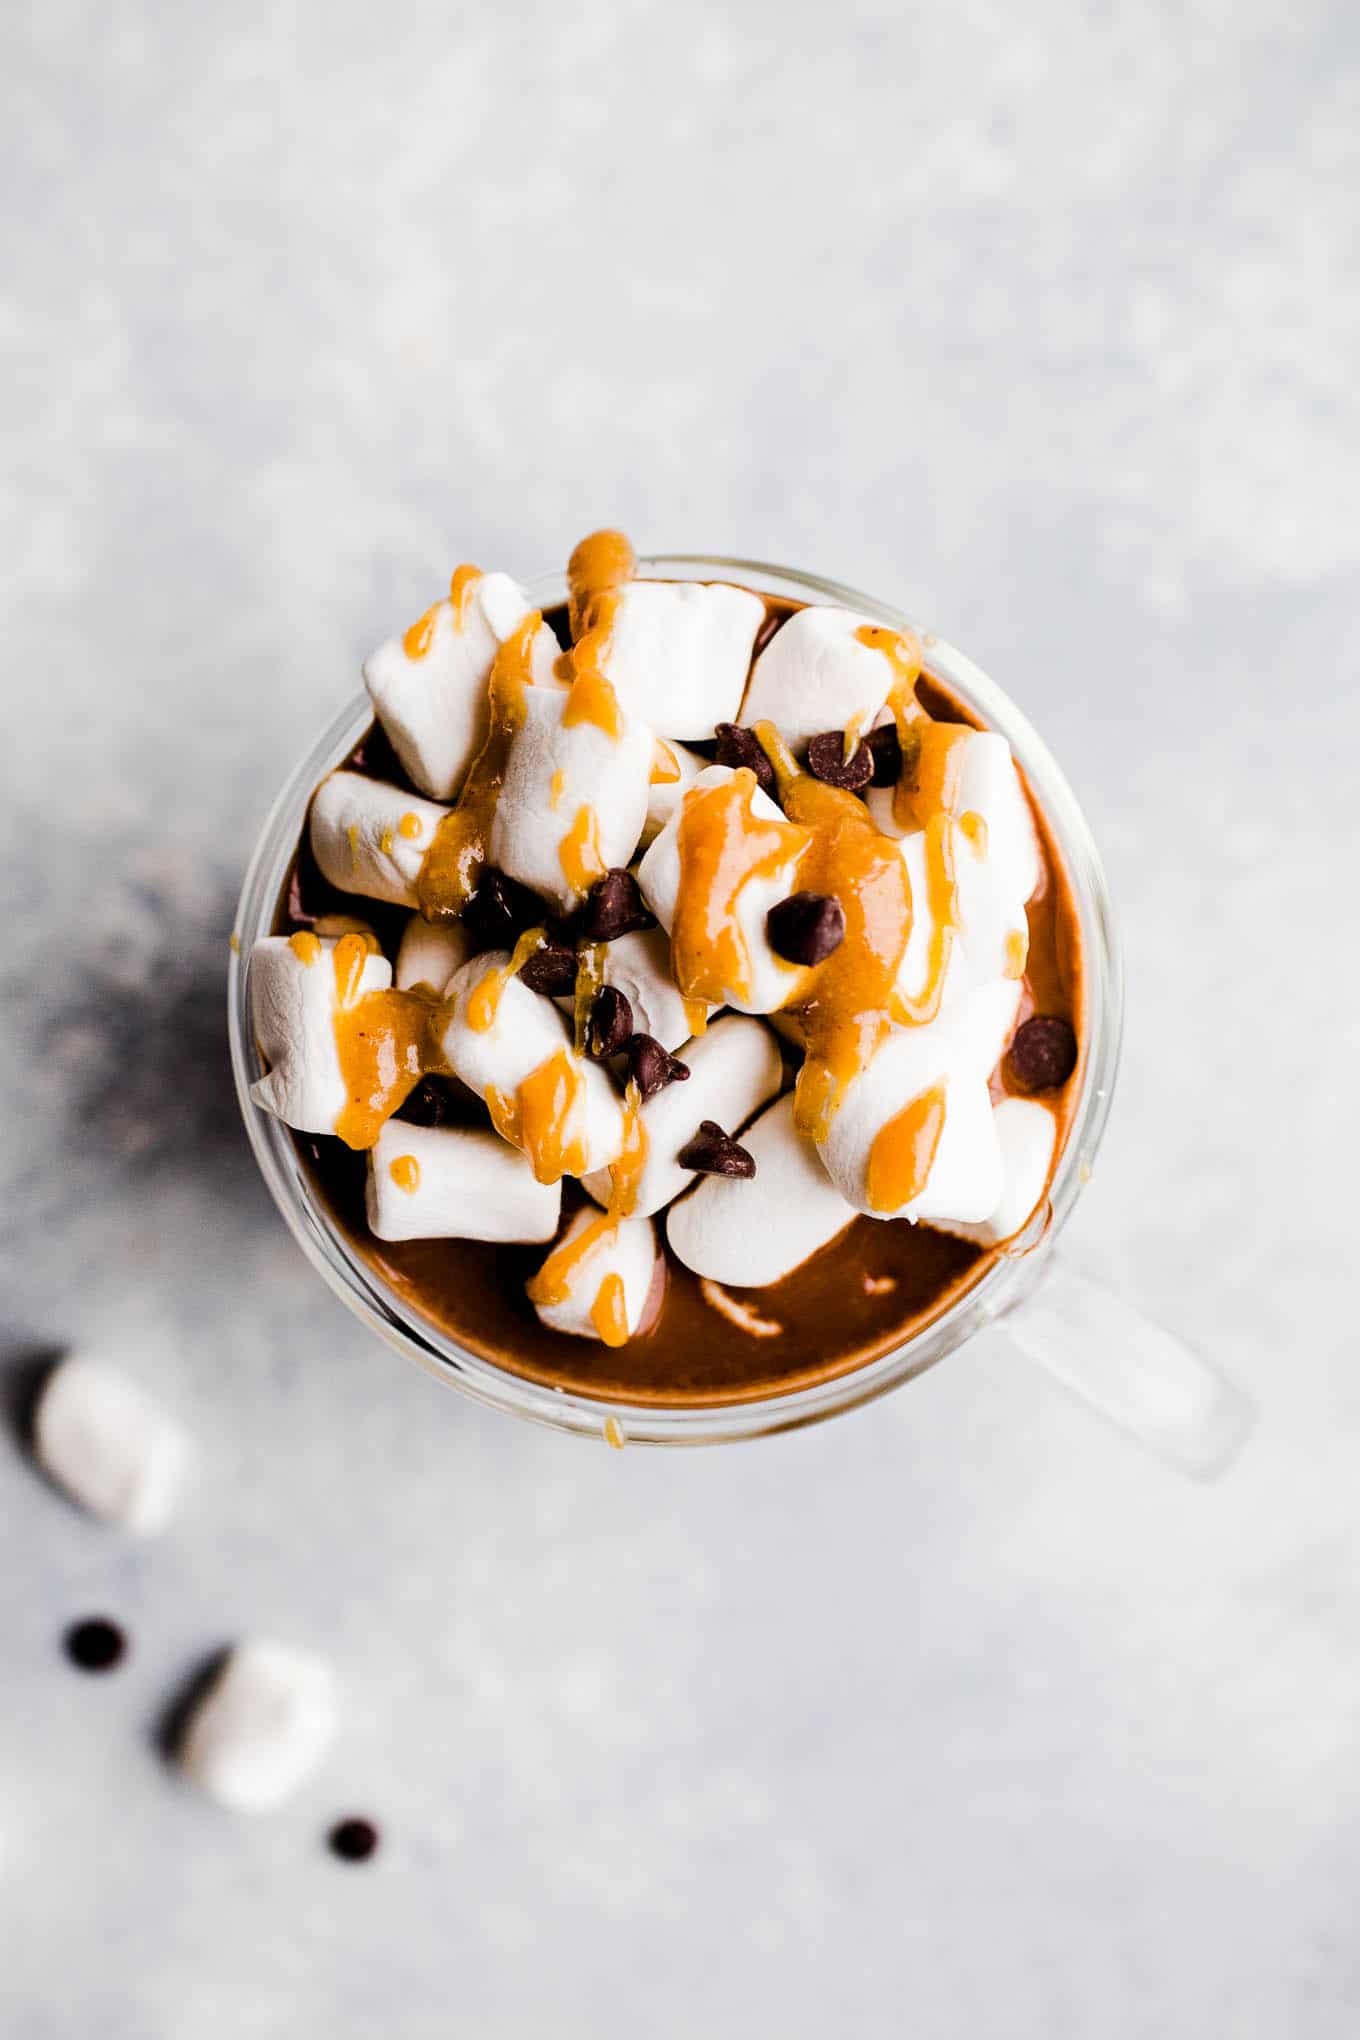 hot chocolate with marshmallows, chocolate chips, and peanut butter sauce